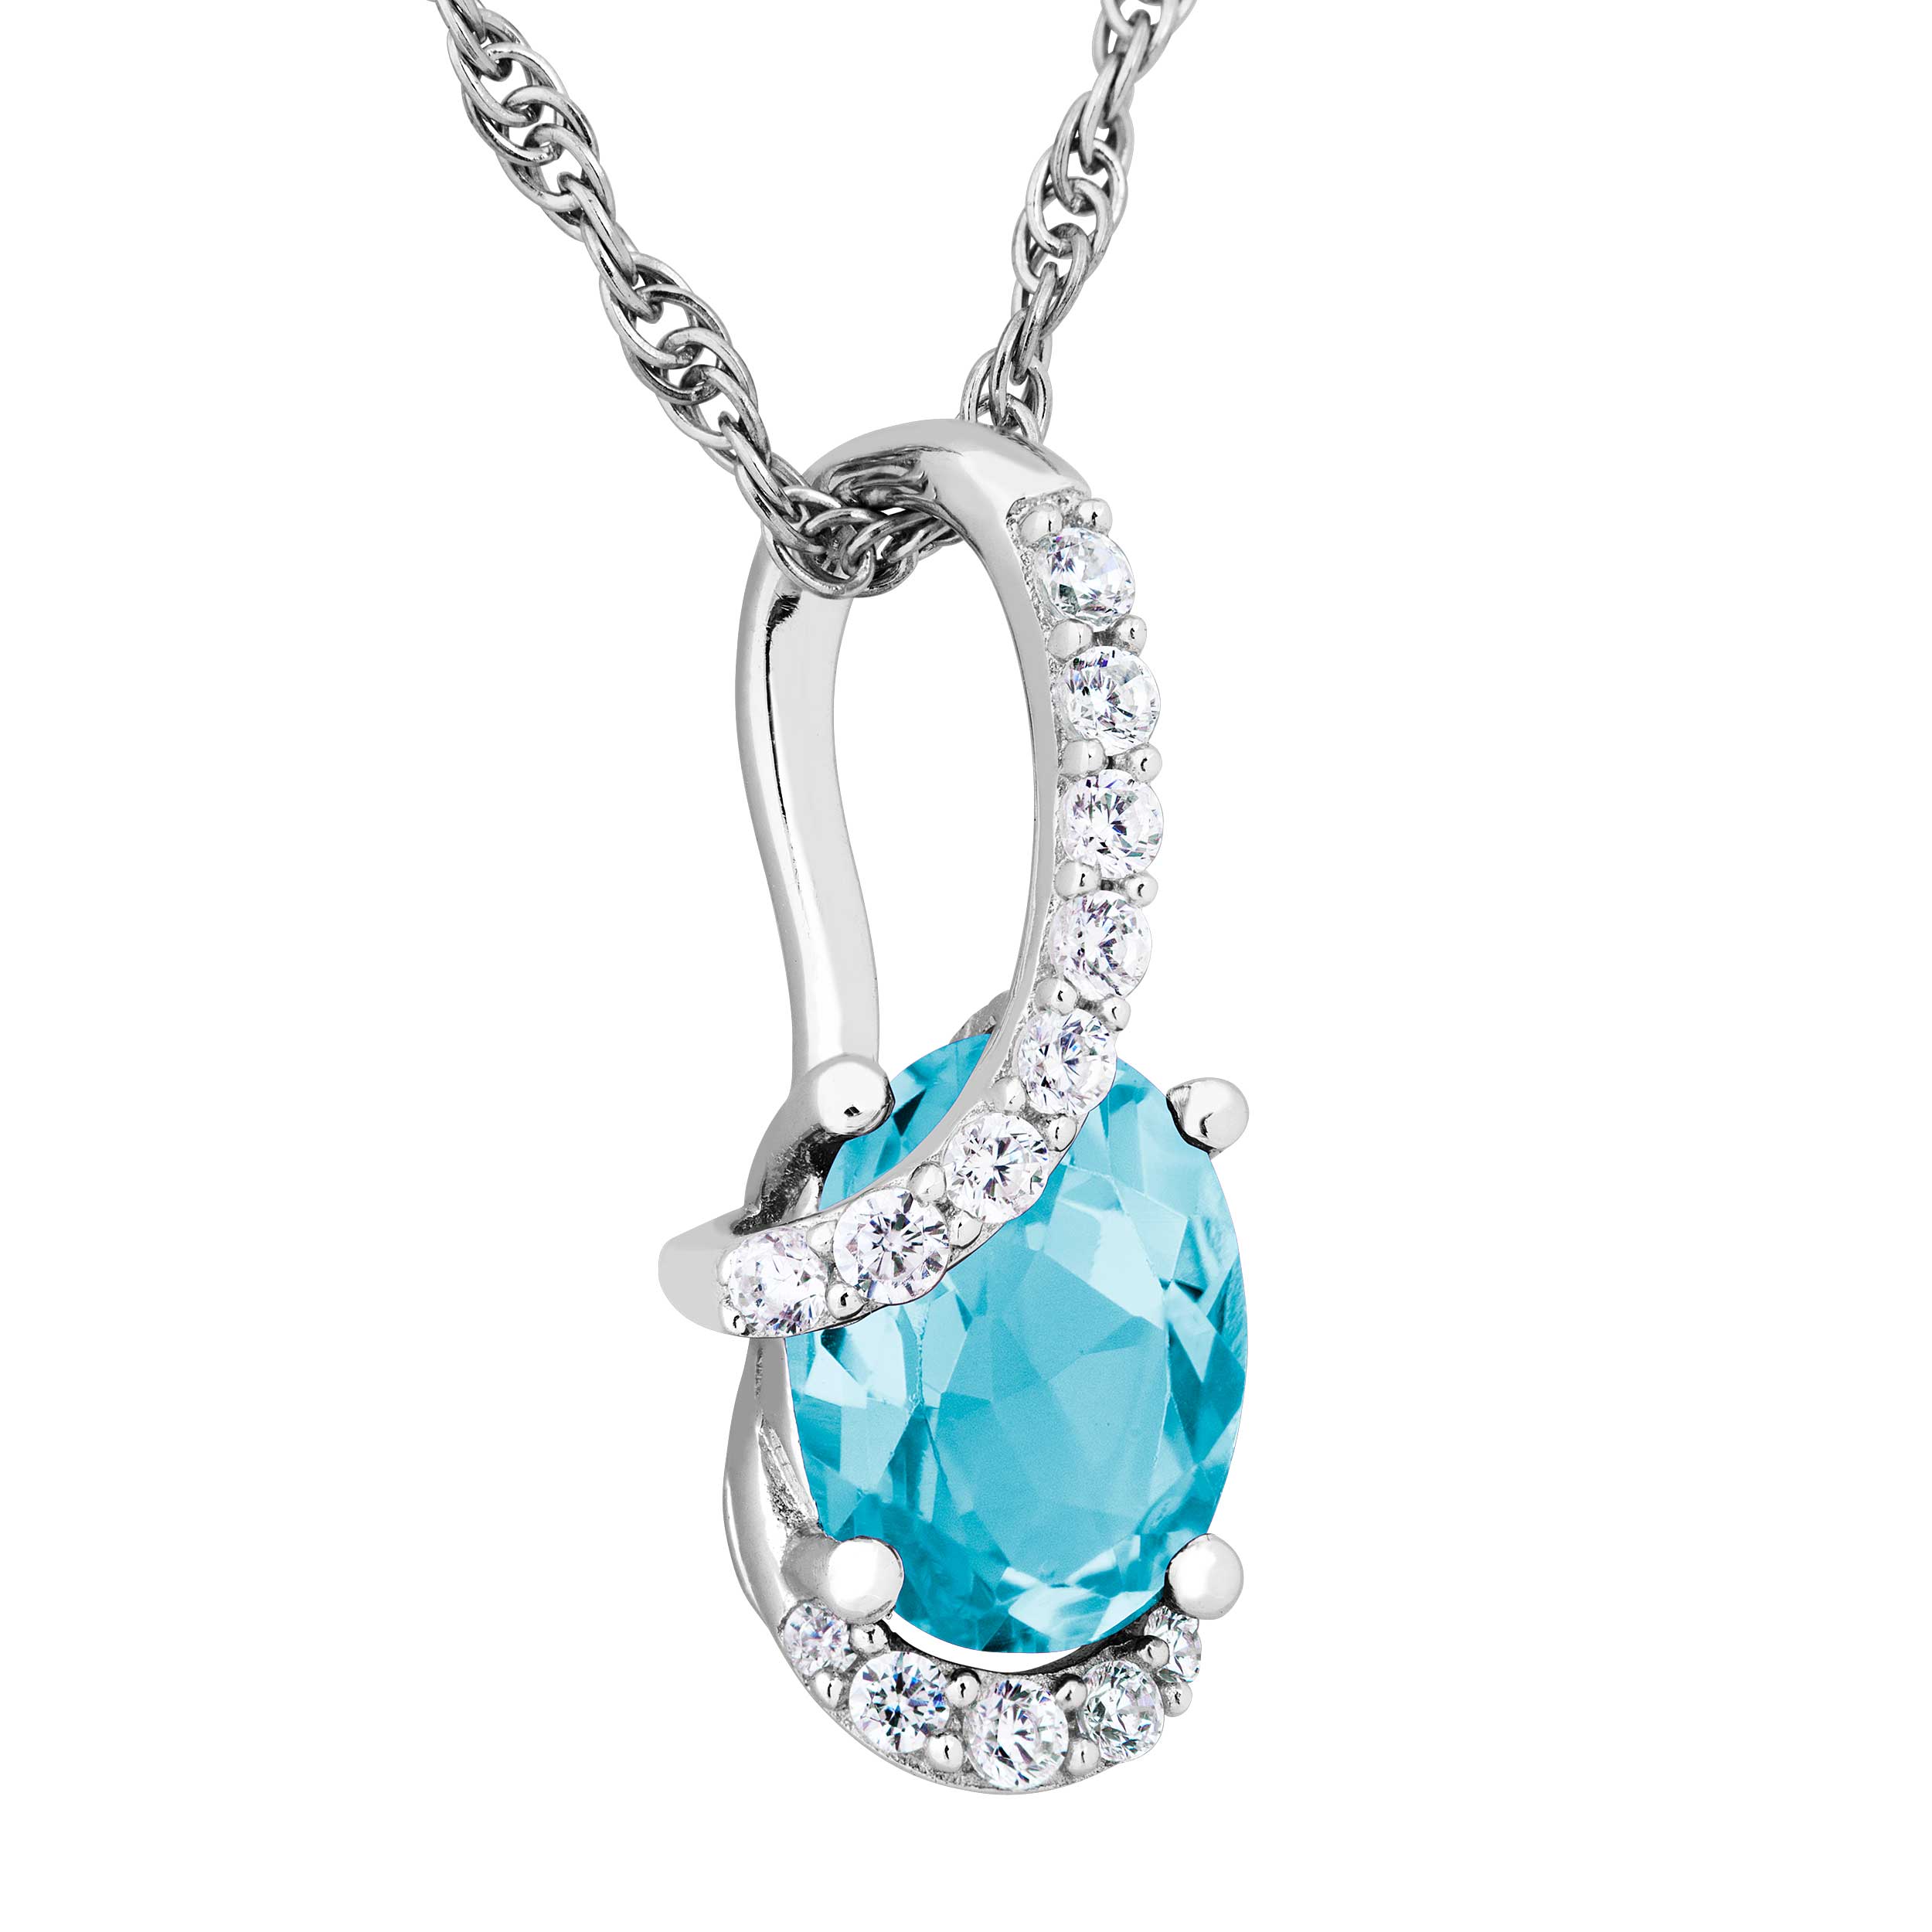 Oval Swiss Blue Topaz and White Topaz Pendant Necklace, Rhodium Plated Sterling Silver